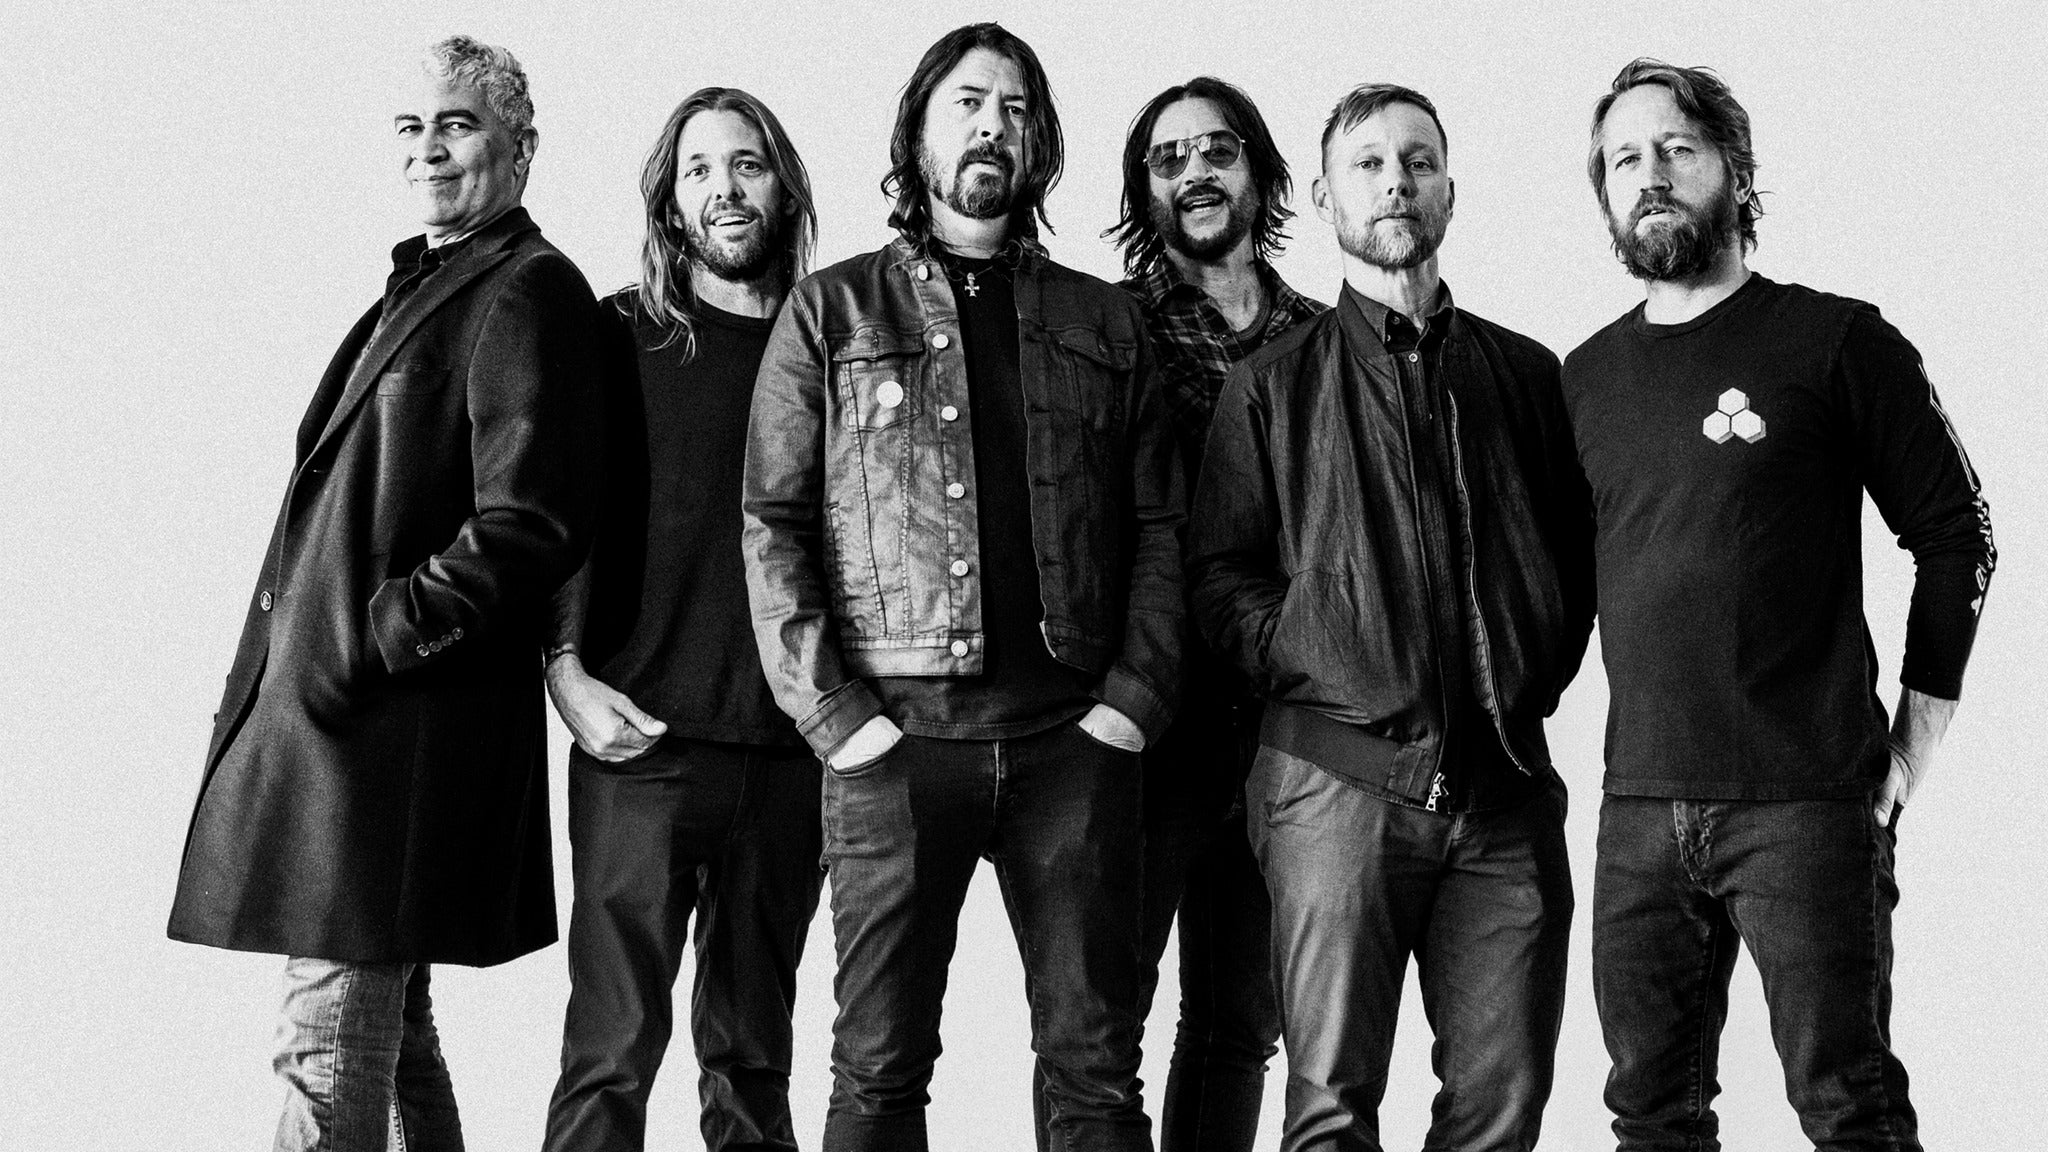 I am a River lyrics photo Dave Grohl Foo fighters march 2015  Foo fighters  dave grohl, Foo fighters nirvana, Foo fighters dave